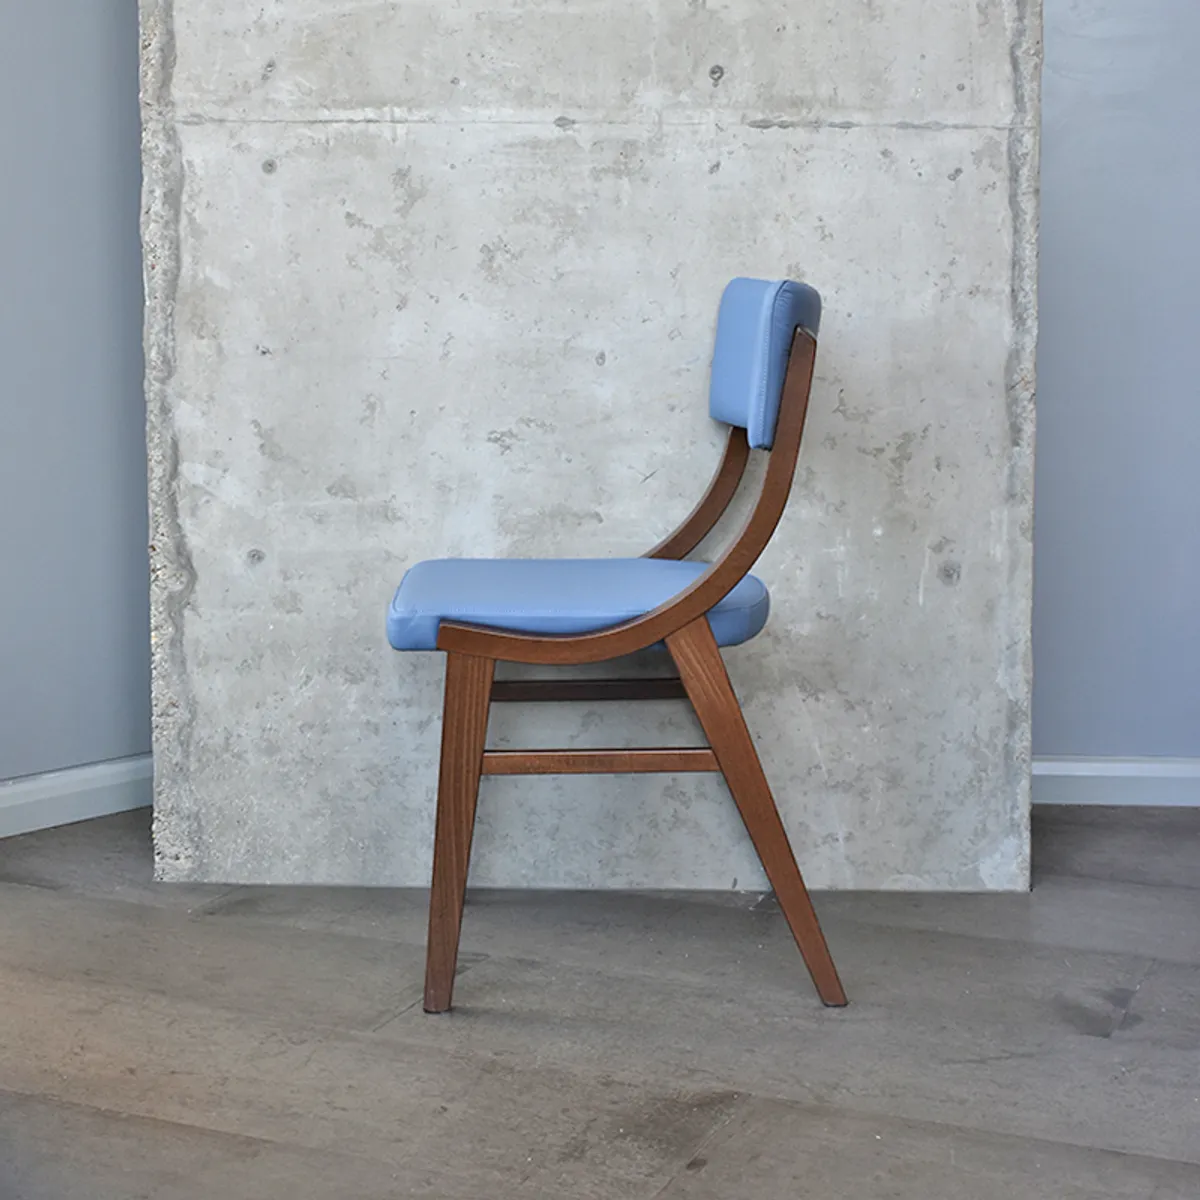 Victoria Chair New Furniture From Milan 2019 By Inside Out Contracts 010